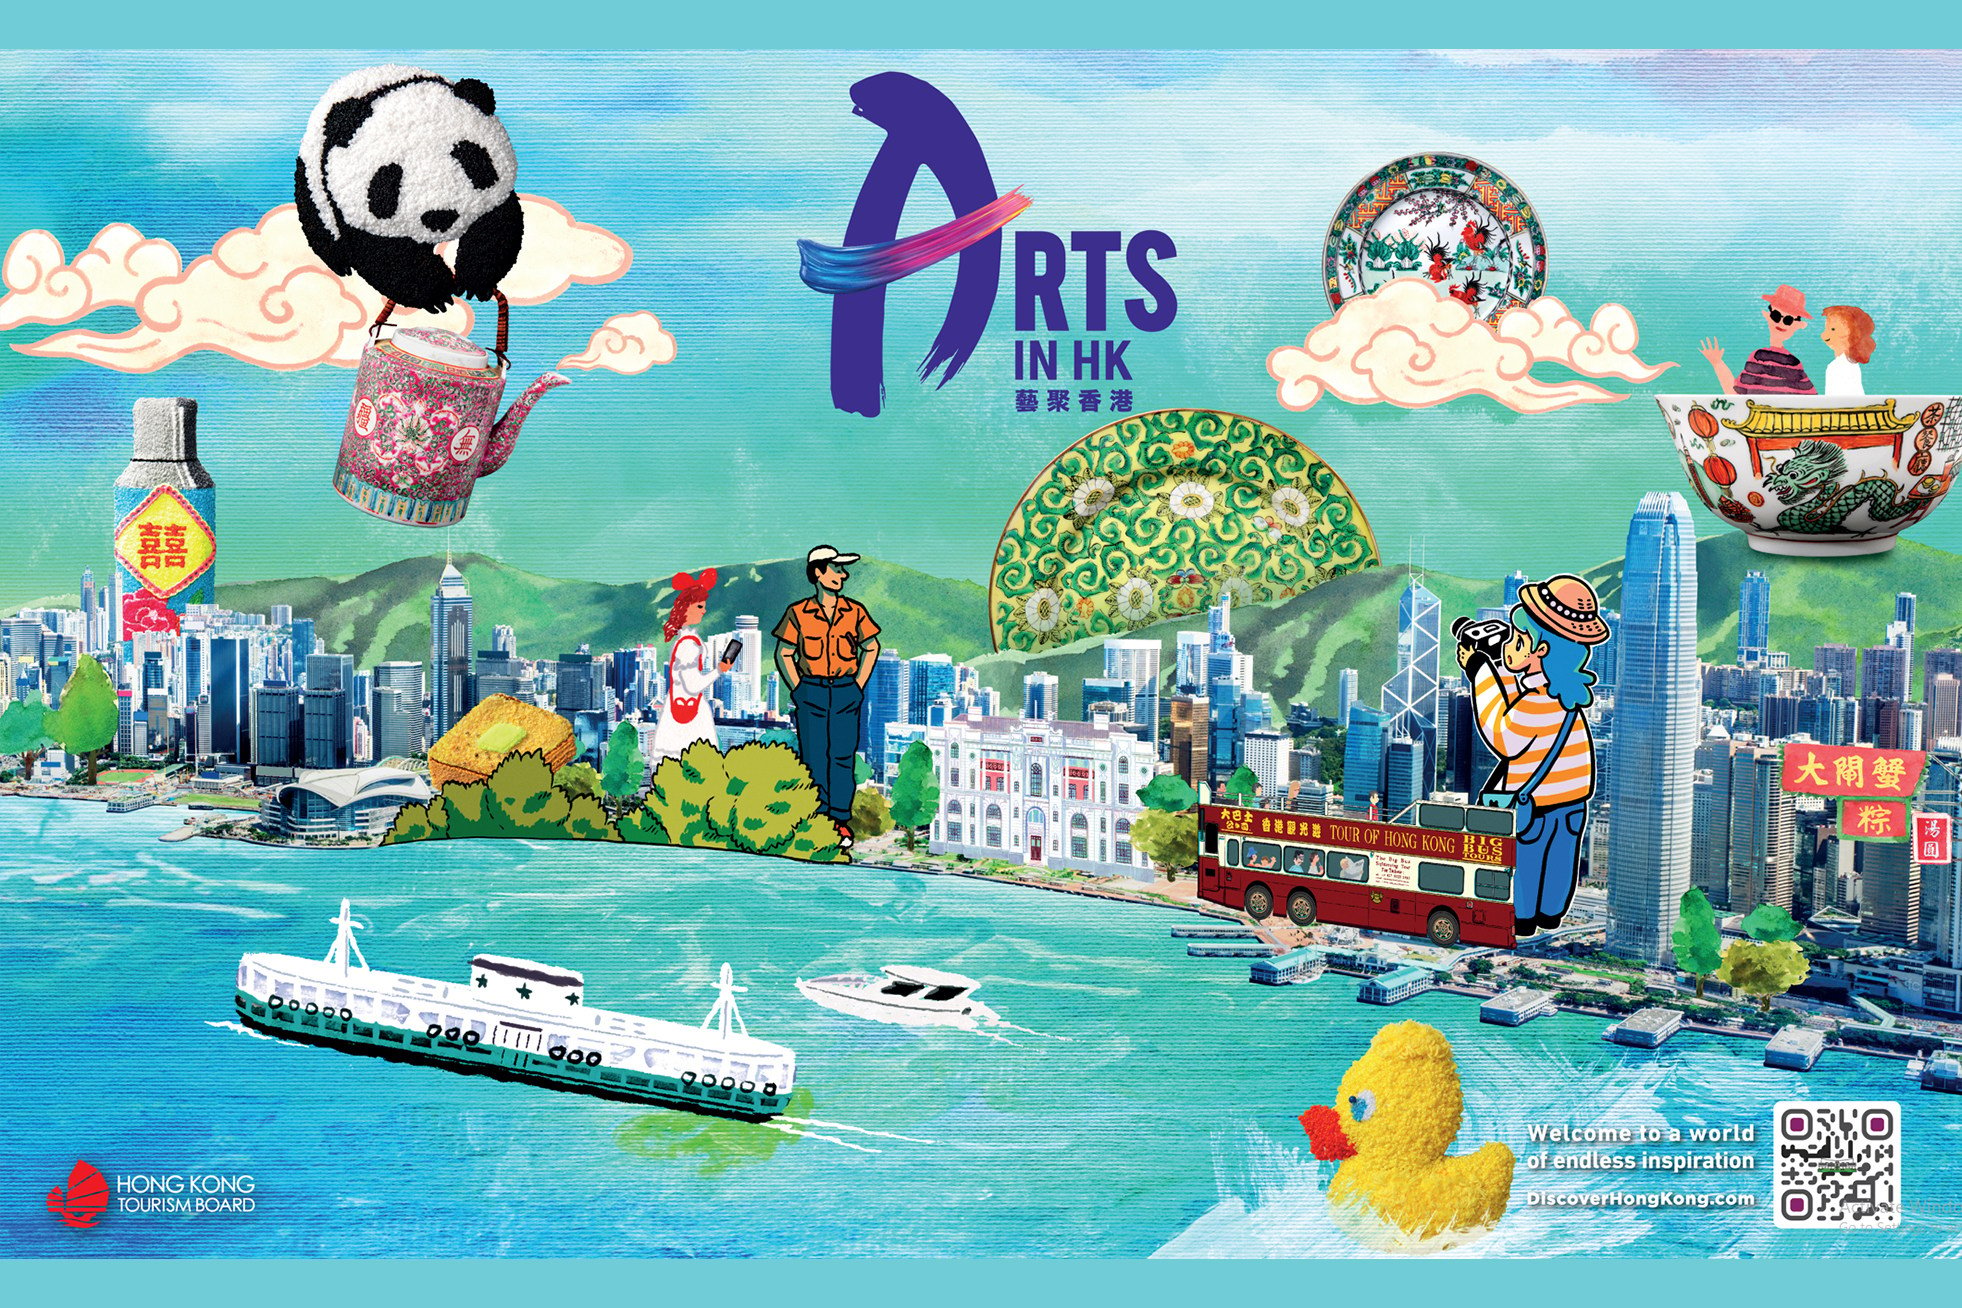 Two world-class arts fairs, Art Basel Hong Kong and Art Central, WestK FunFest’s family-oriented activities and Art@Harbour 2024’s spectacular illuminations are among the many attractions on offer during Arts in Hong Kong on Victoria Harbour’s waterfront.